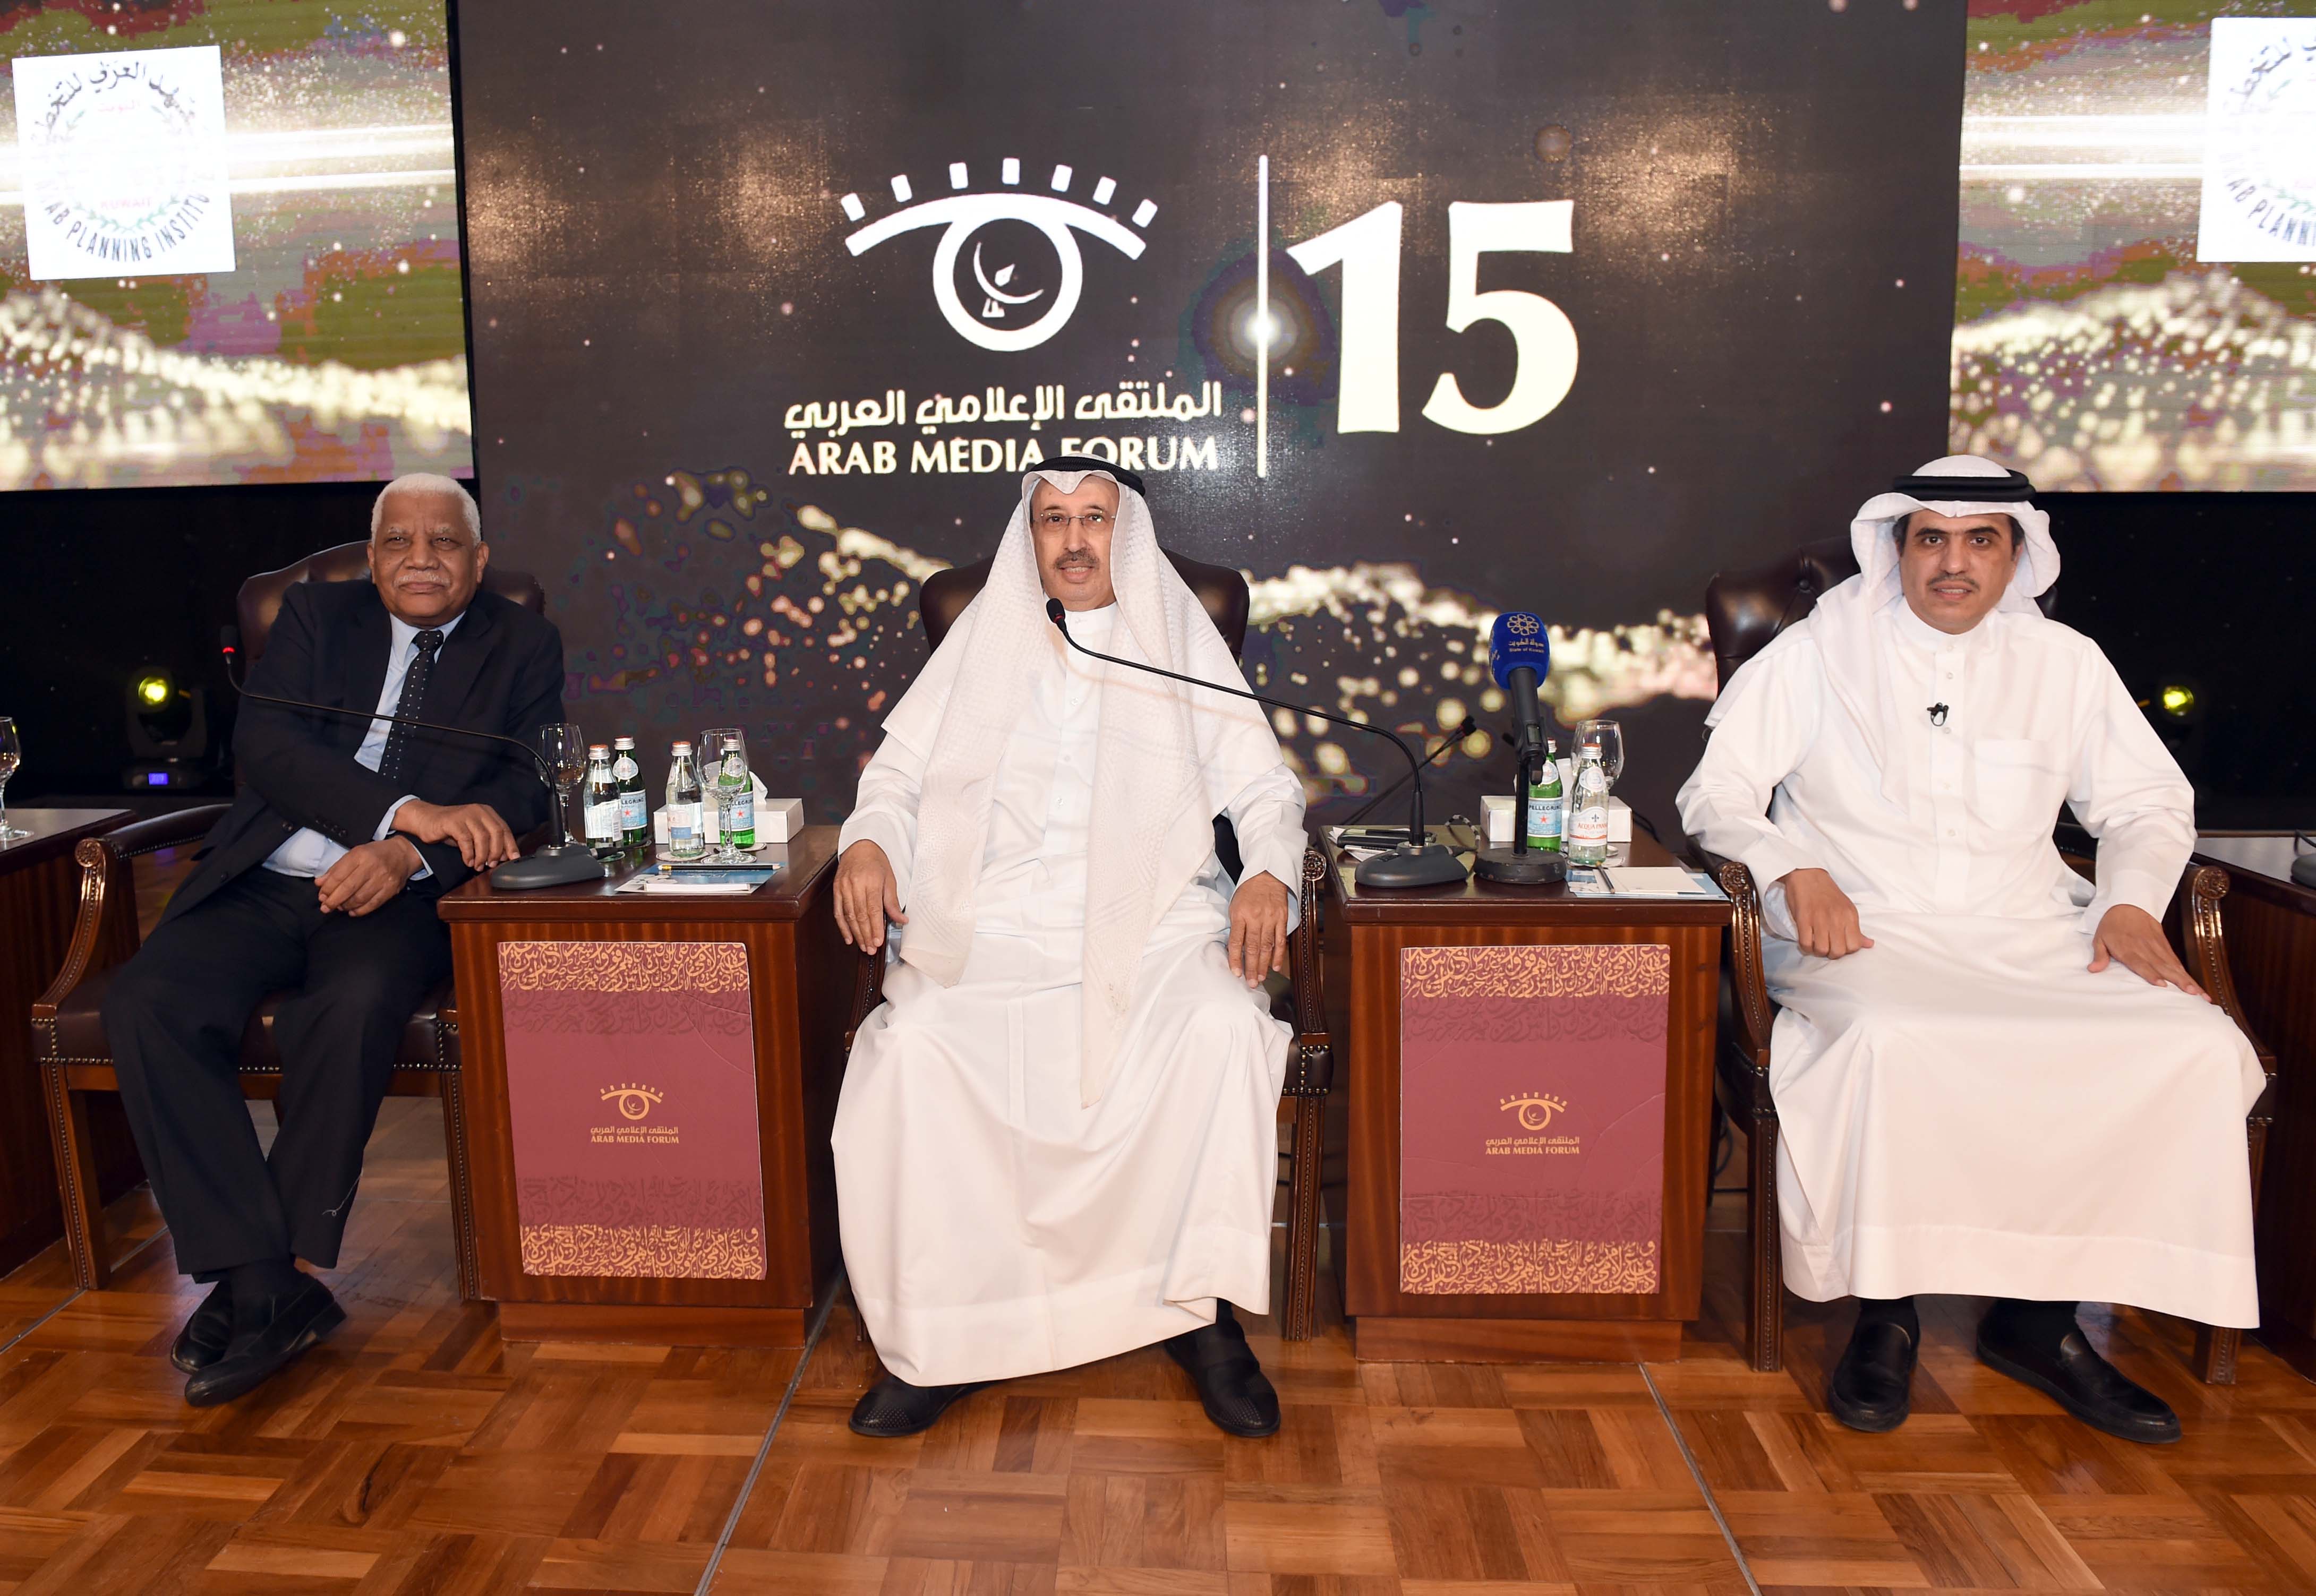 Current and former ministers and academicians participates in the Arab Media Forum